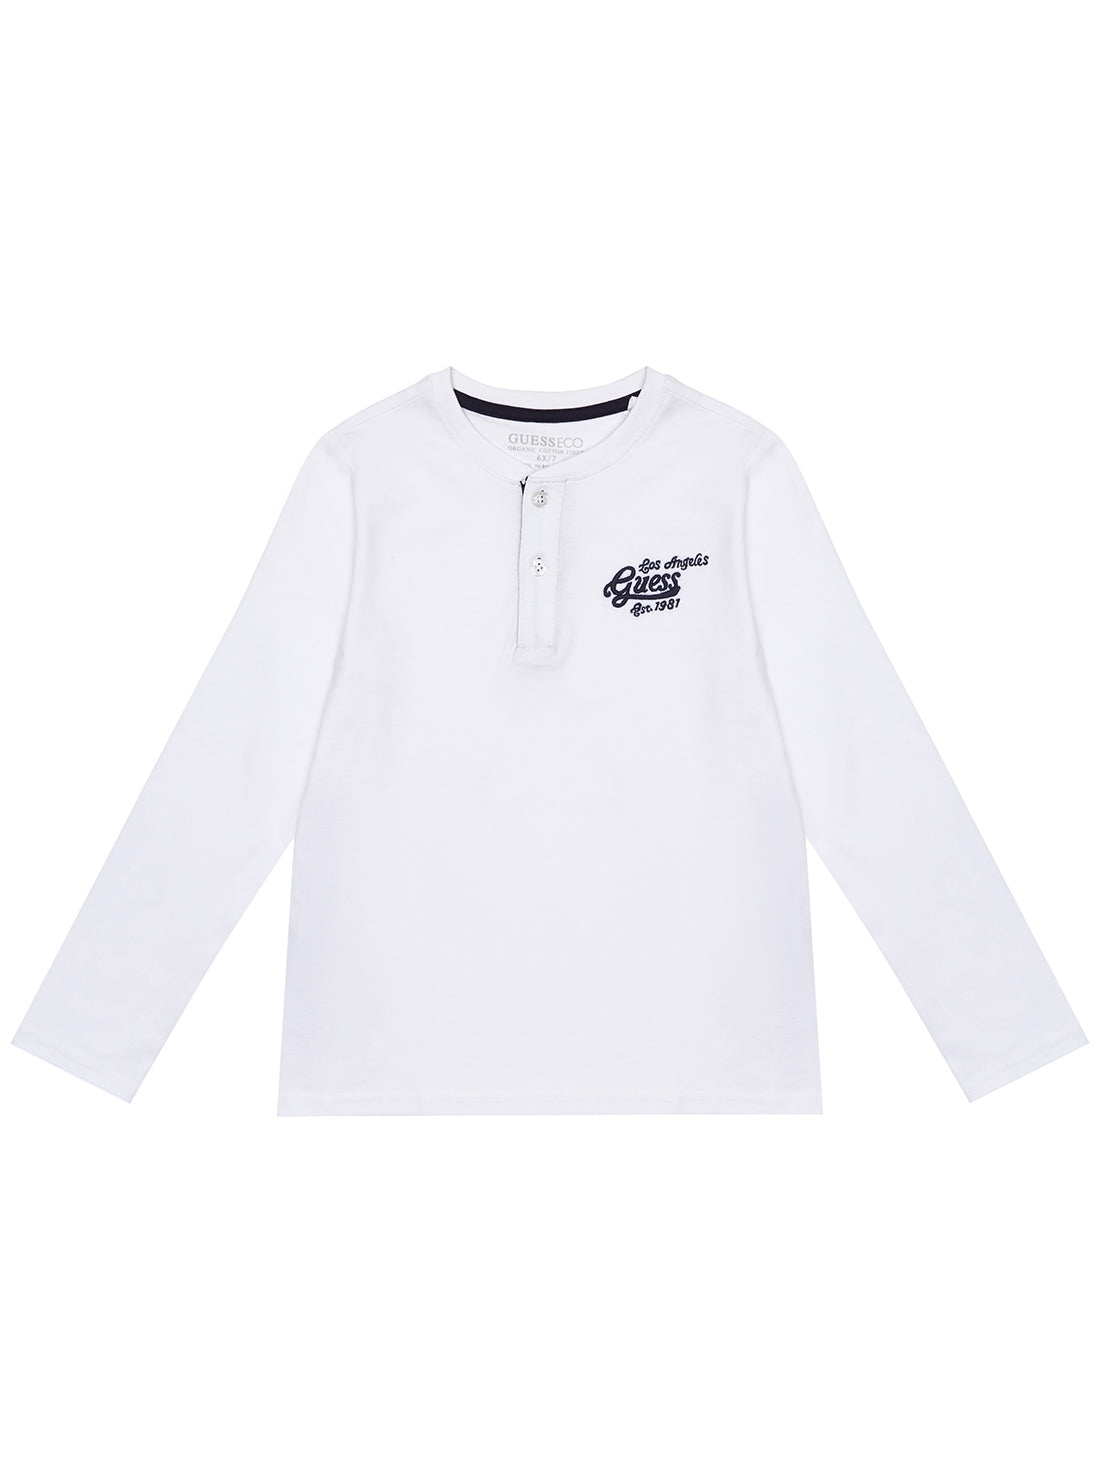 GUESS White Henley Long Sleeves T-Shirt front view